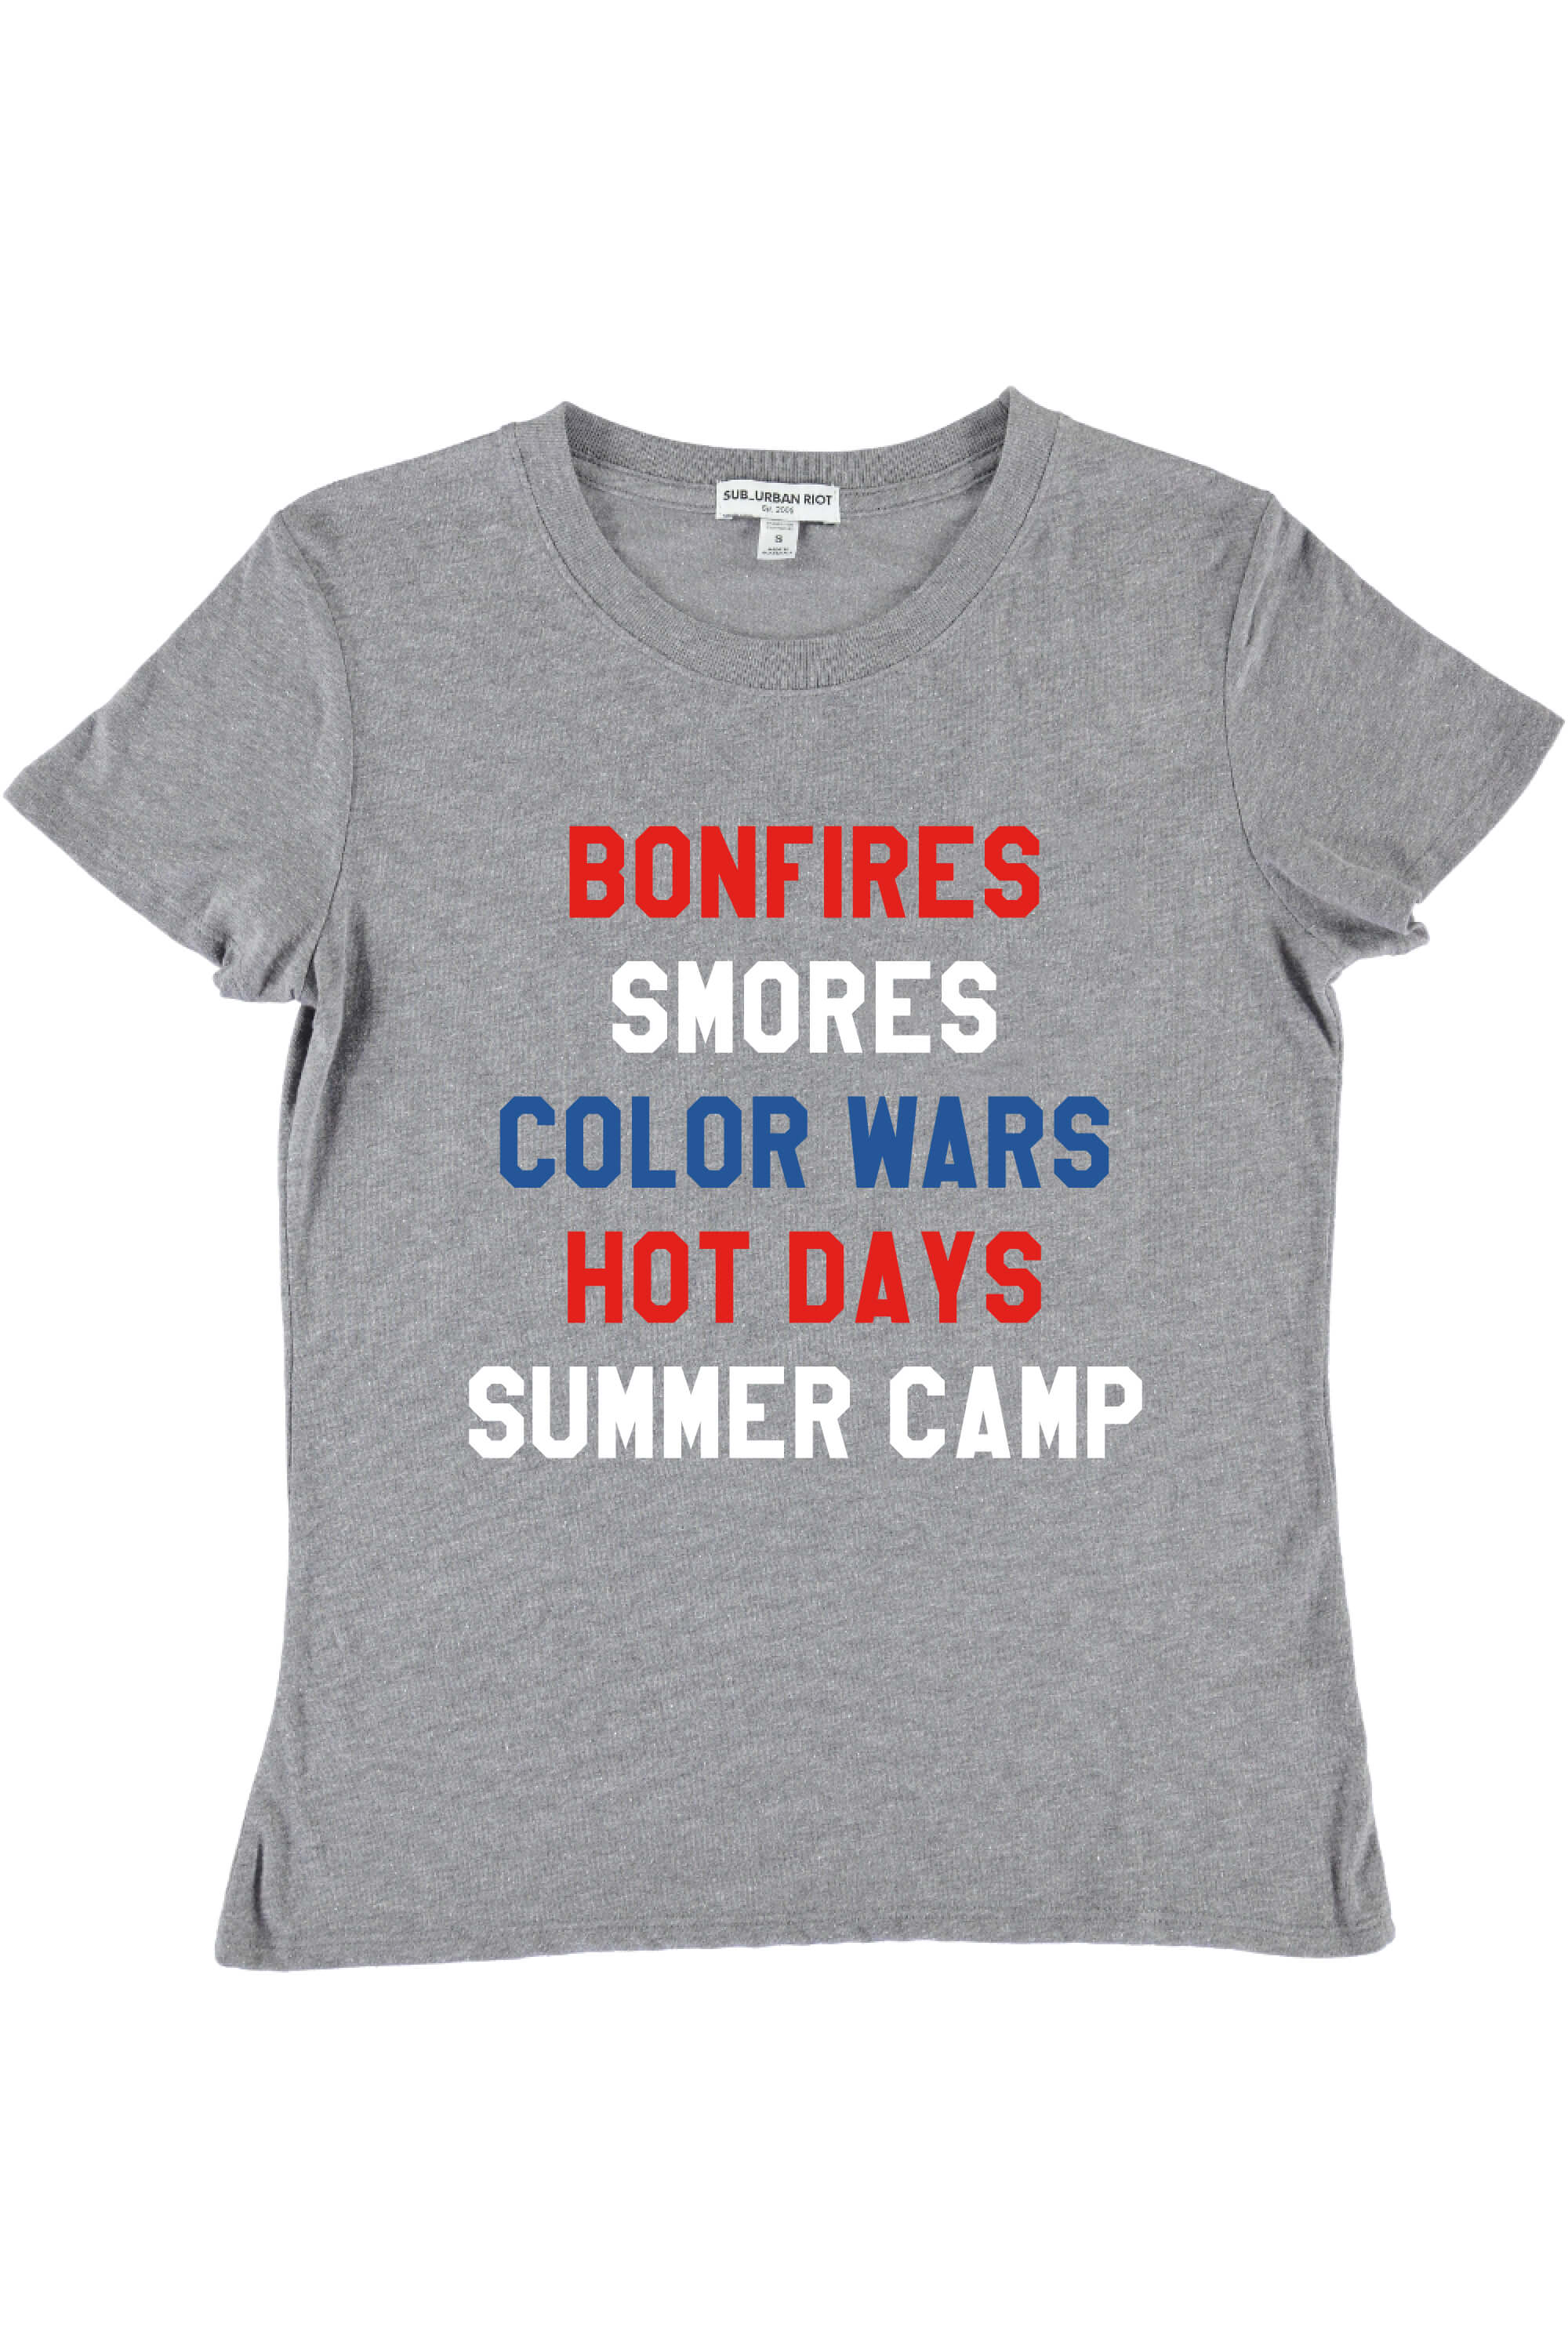 SUMMER CAMP LIST YOUTH SIZE LOOSE TEE